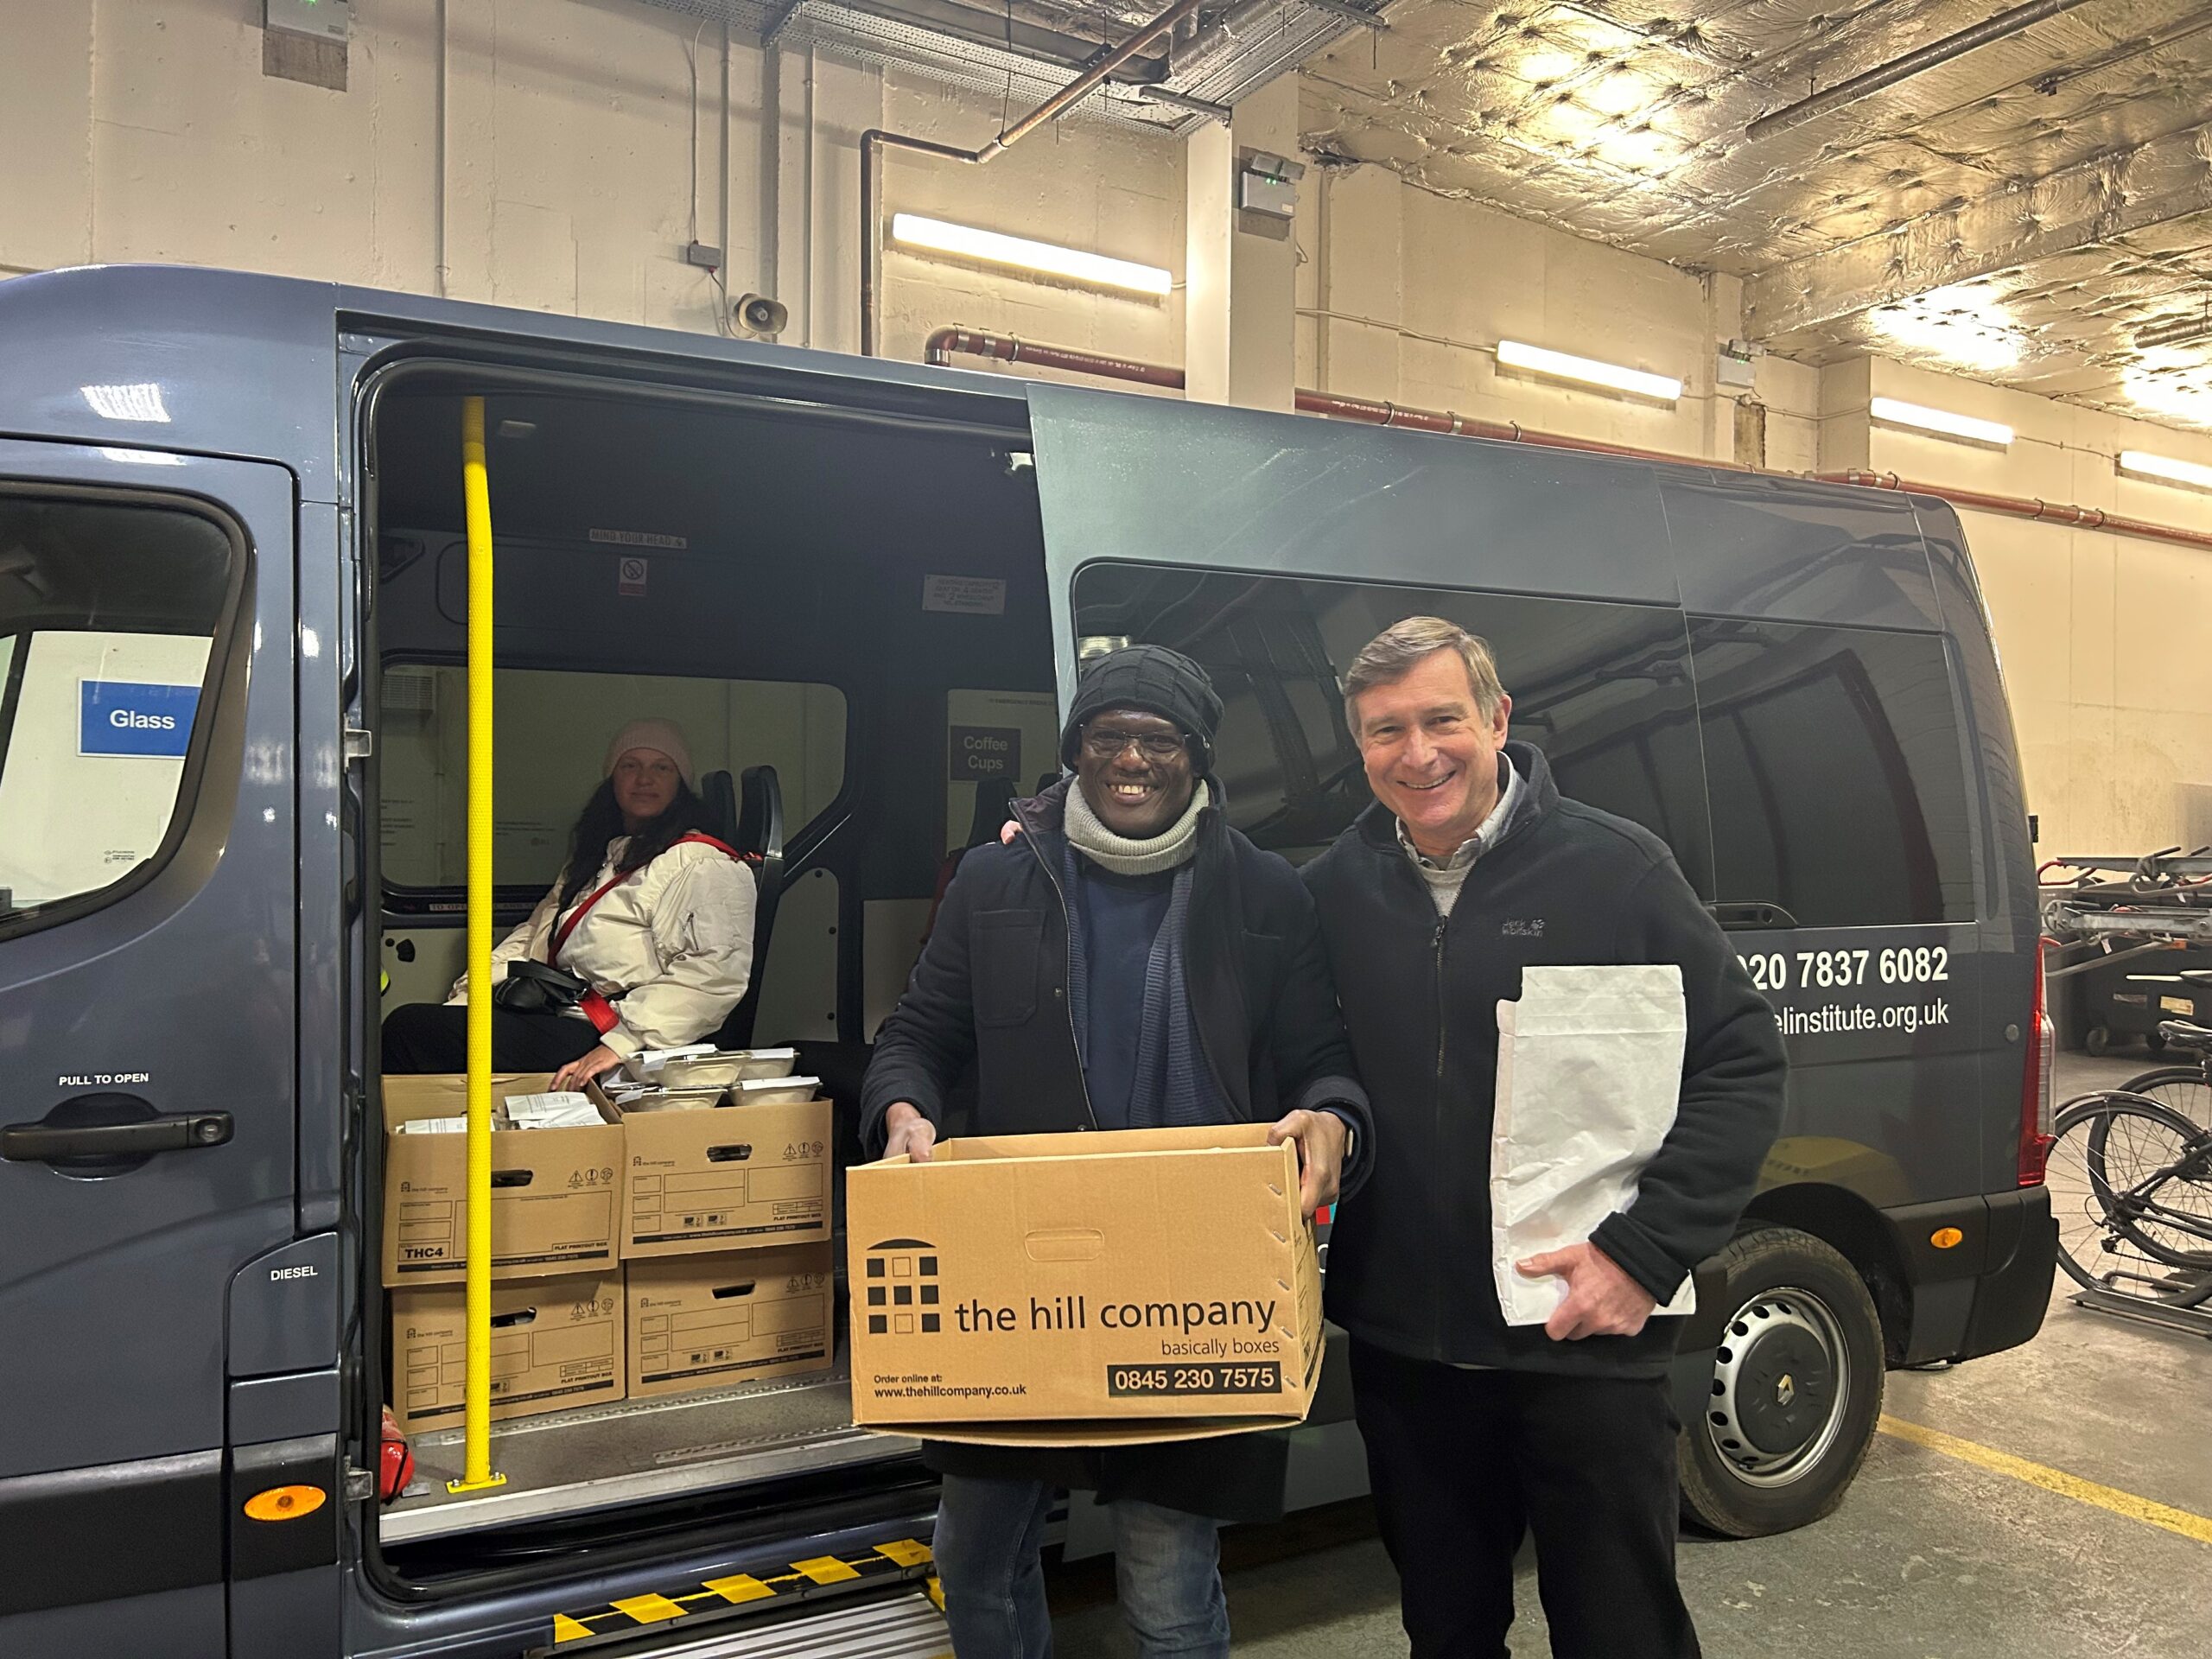 Olu Alake, CEO of The Peel Institute and John Handford of Sarasin & Partners on their way to deliver the hot meals